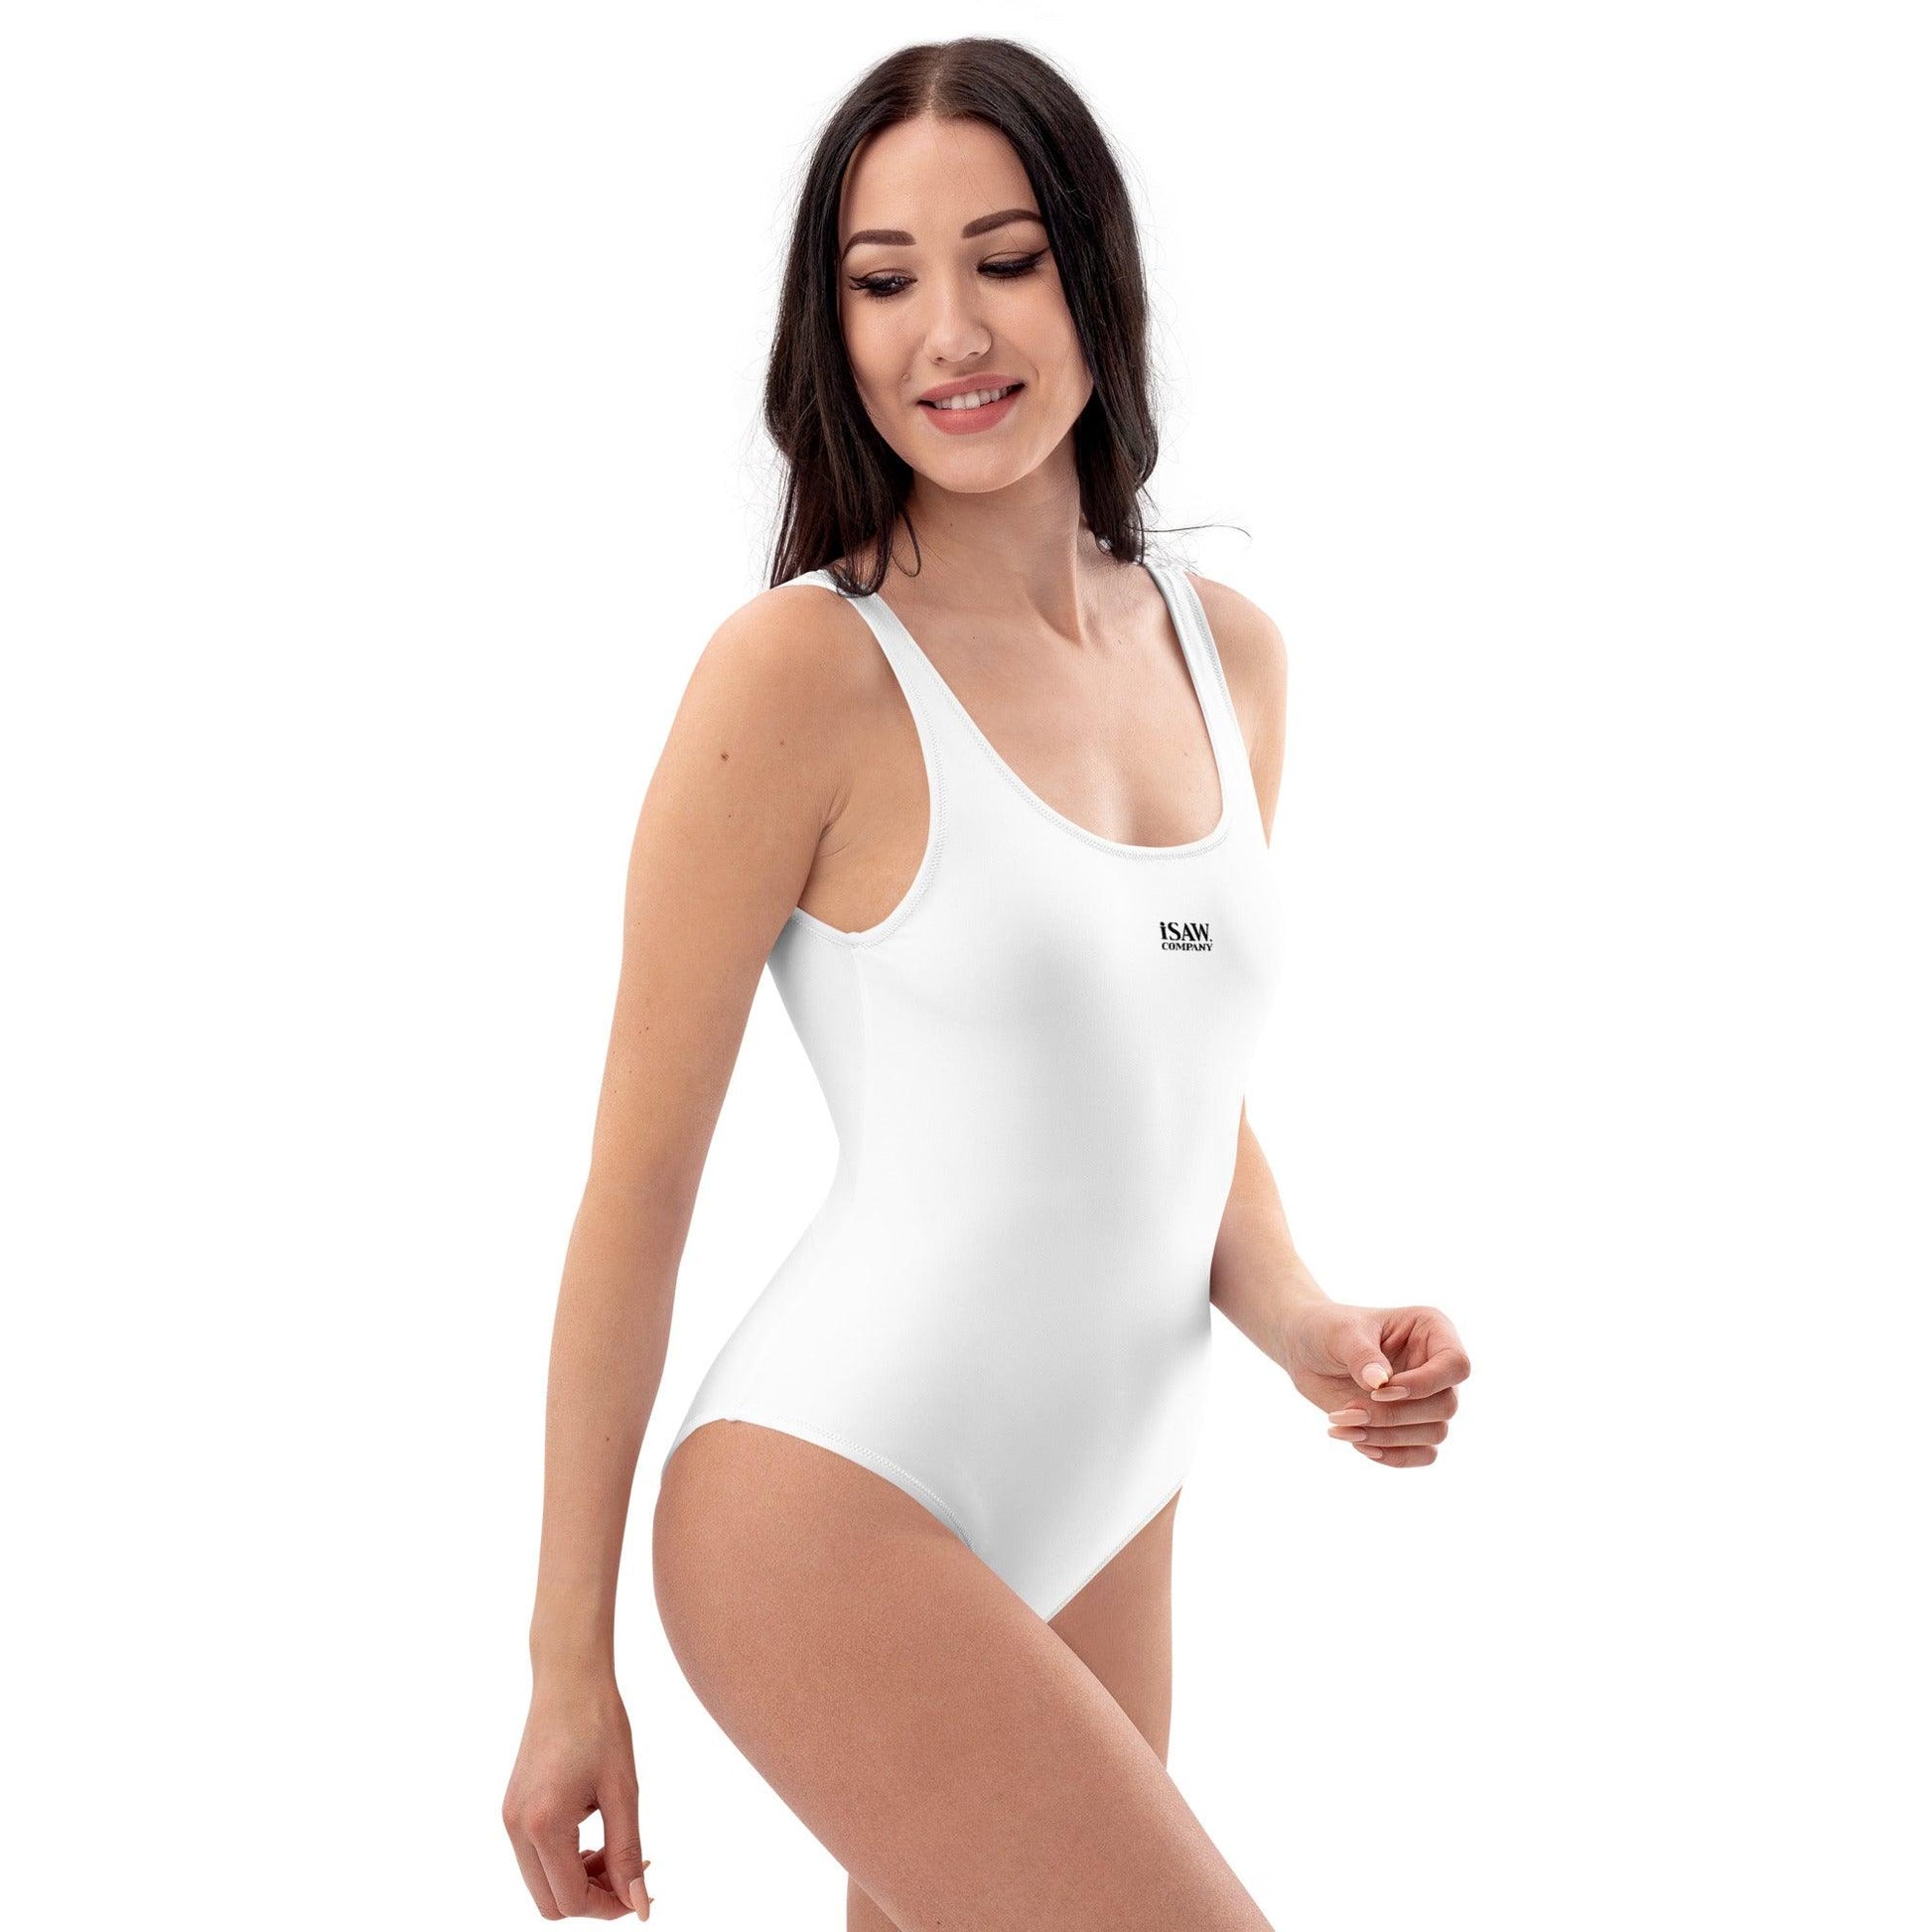 iSAW Womens White One-Piece Swimsuit - iSAW Company